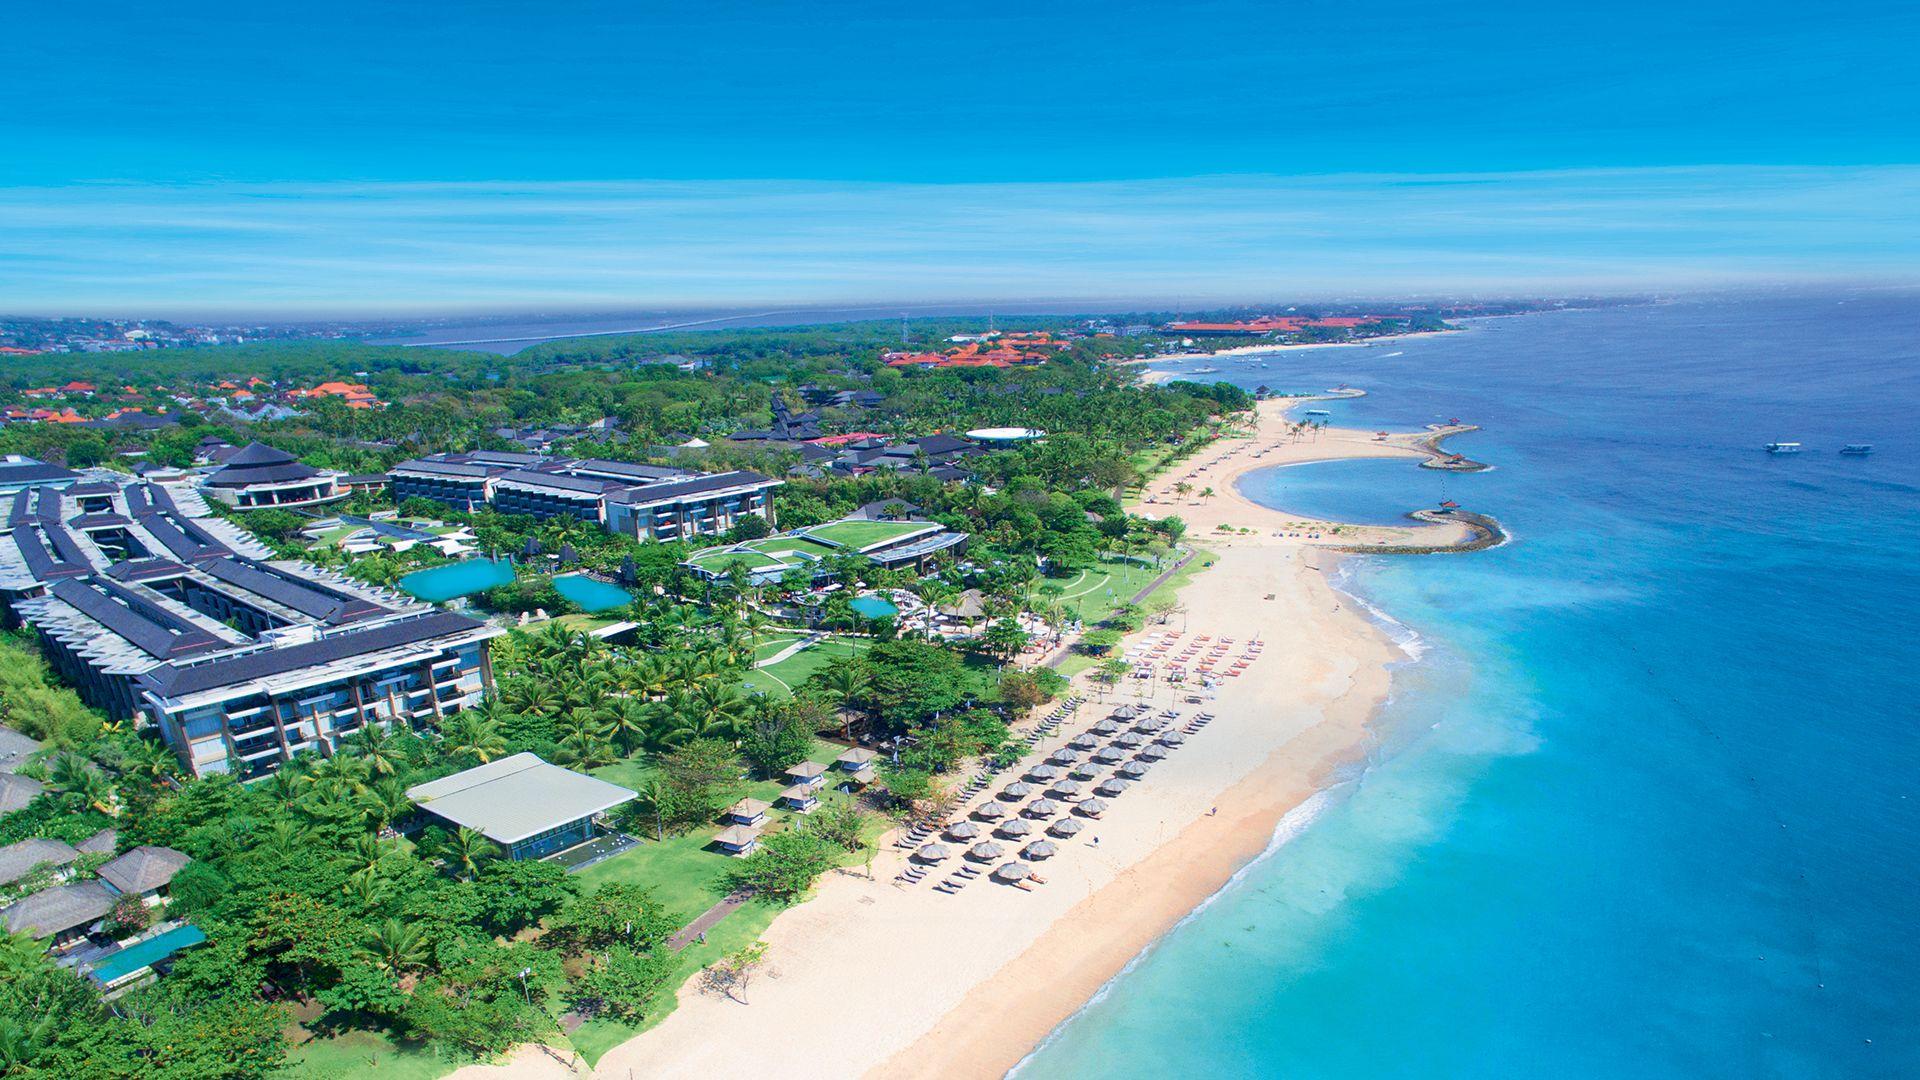 Glamorous Beachfront Getaway with Excellent Dining Inclusions, Nusa Dua